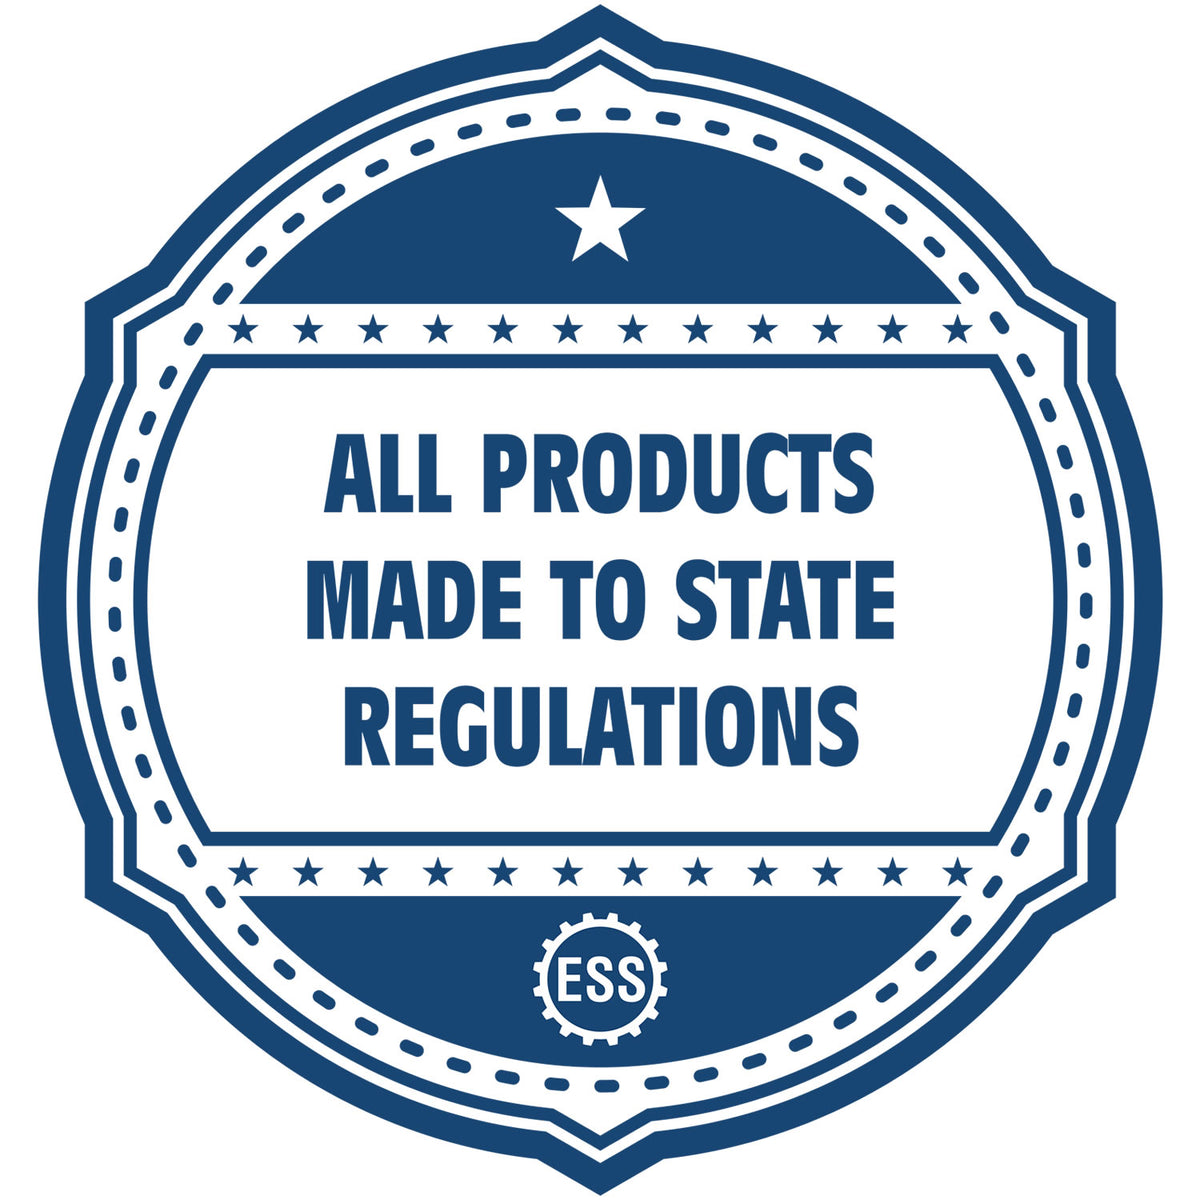 An icon or badge element for the Self-Inking Rectangular Guam Notary Stamp showing that this product is made in compliance with state regulations.